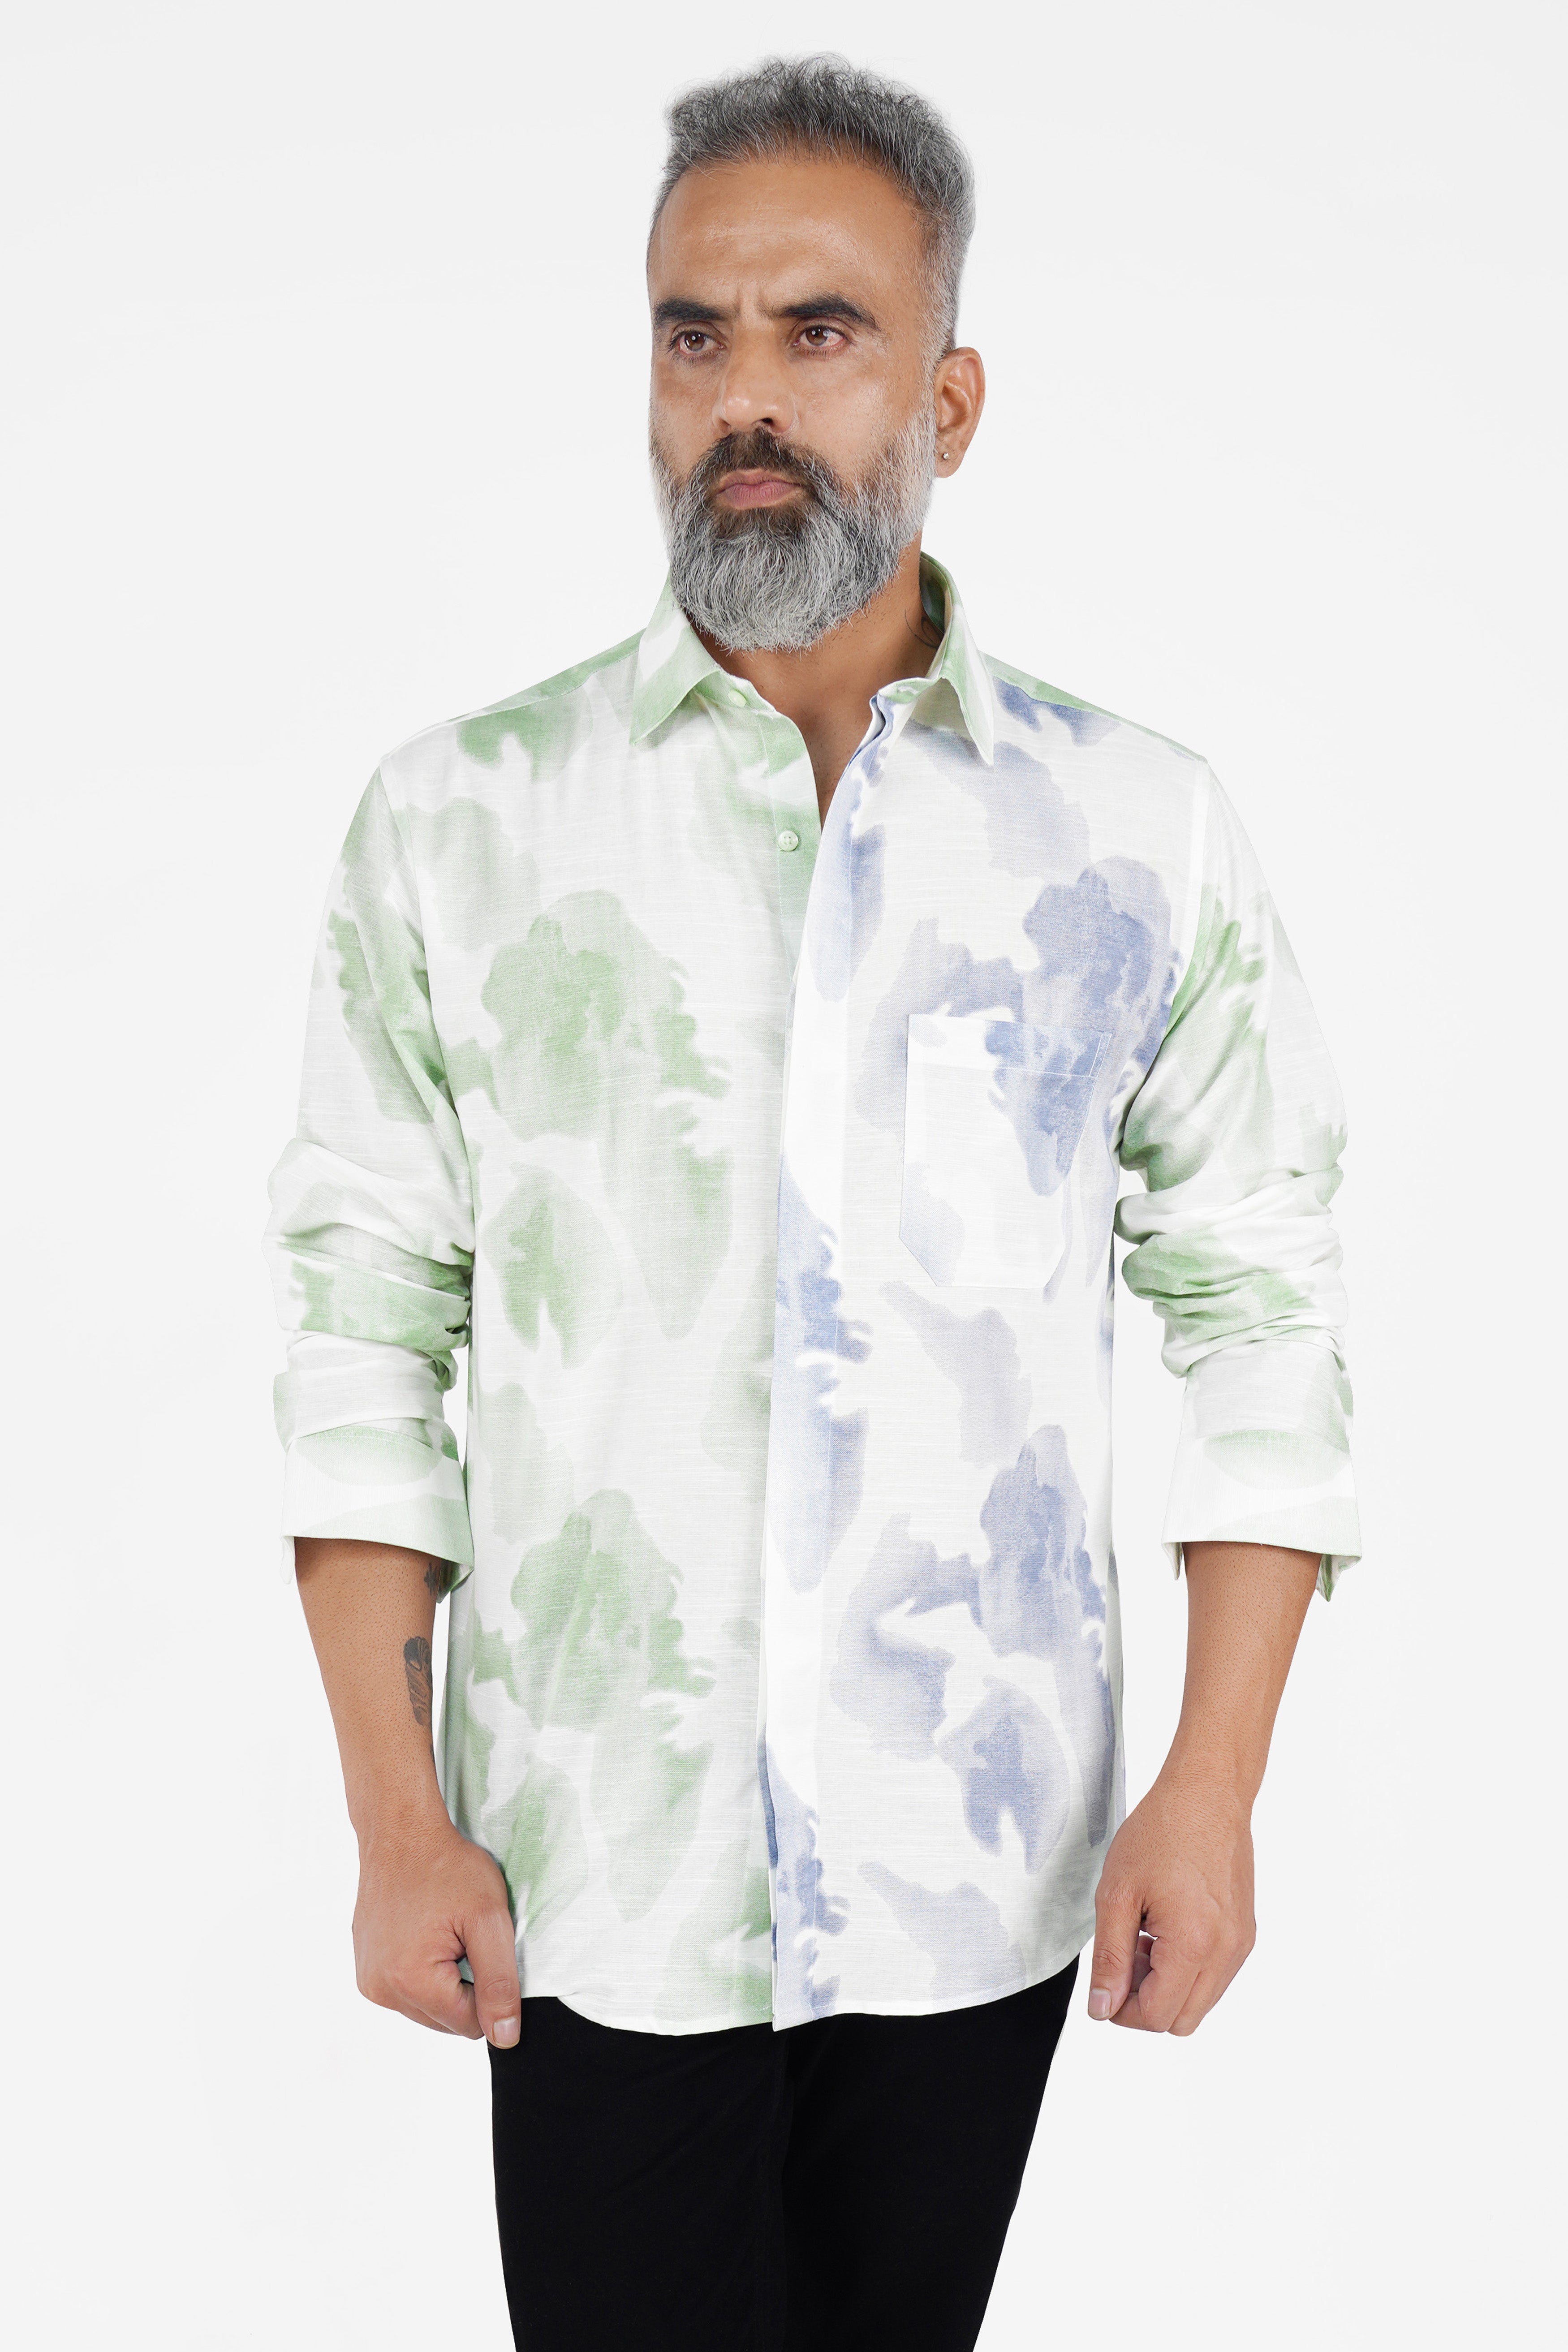 Celadon Green with White and Casper Blue Tie Dye Printed Luxurious Linen Shirt